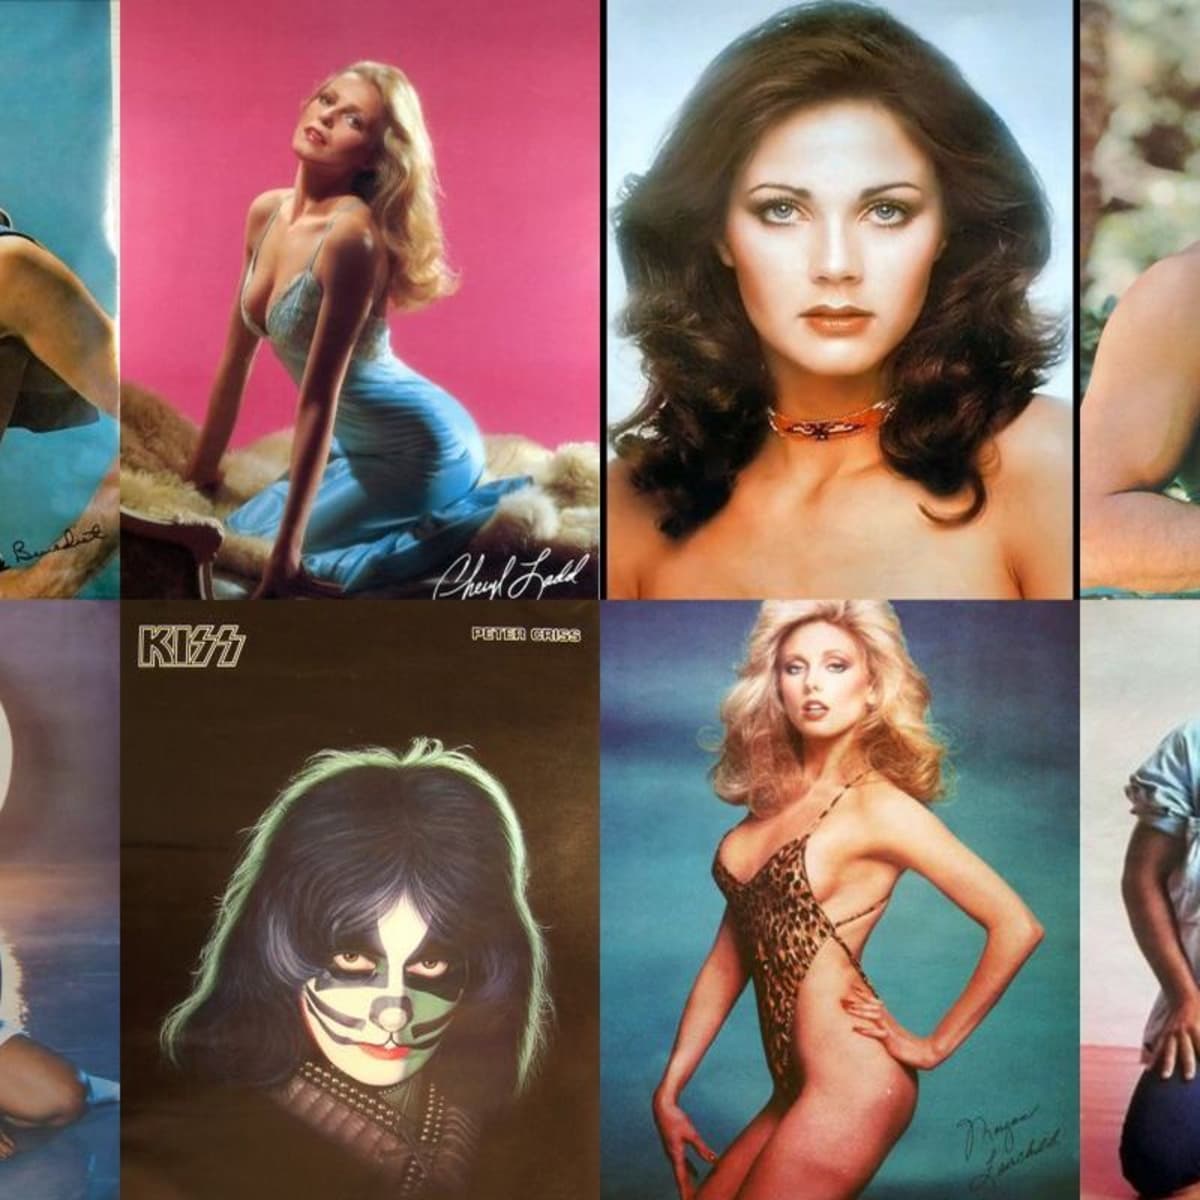 25 Classic Personality Posters of the 1970s and 1980s image pic pic